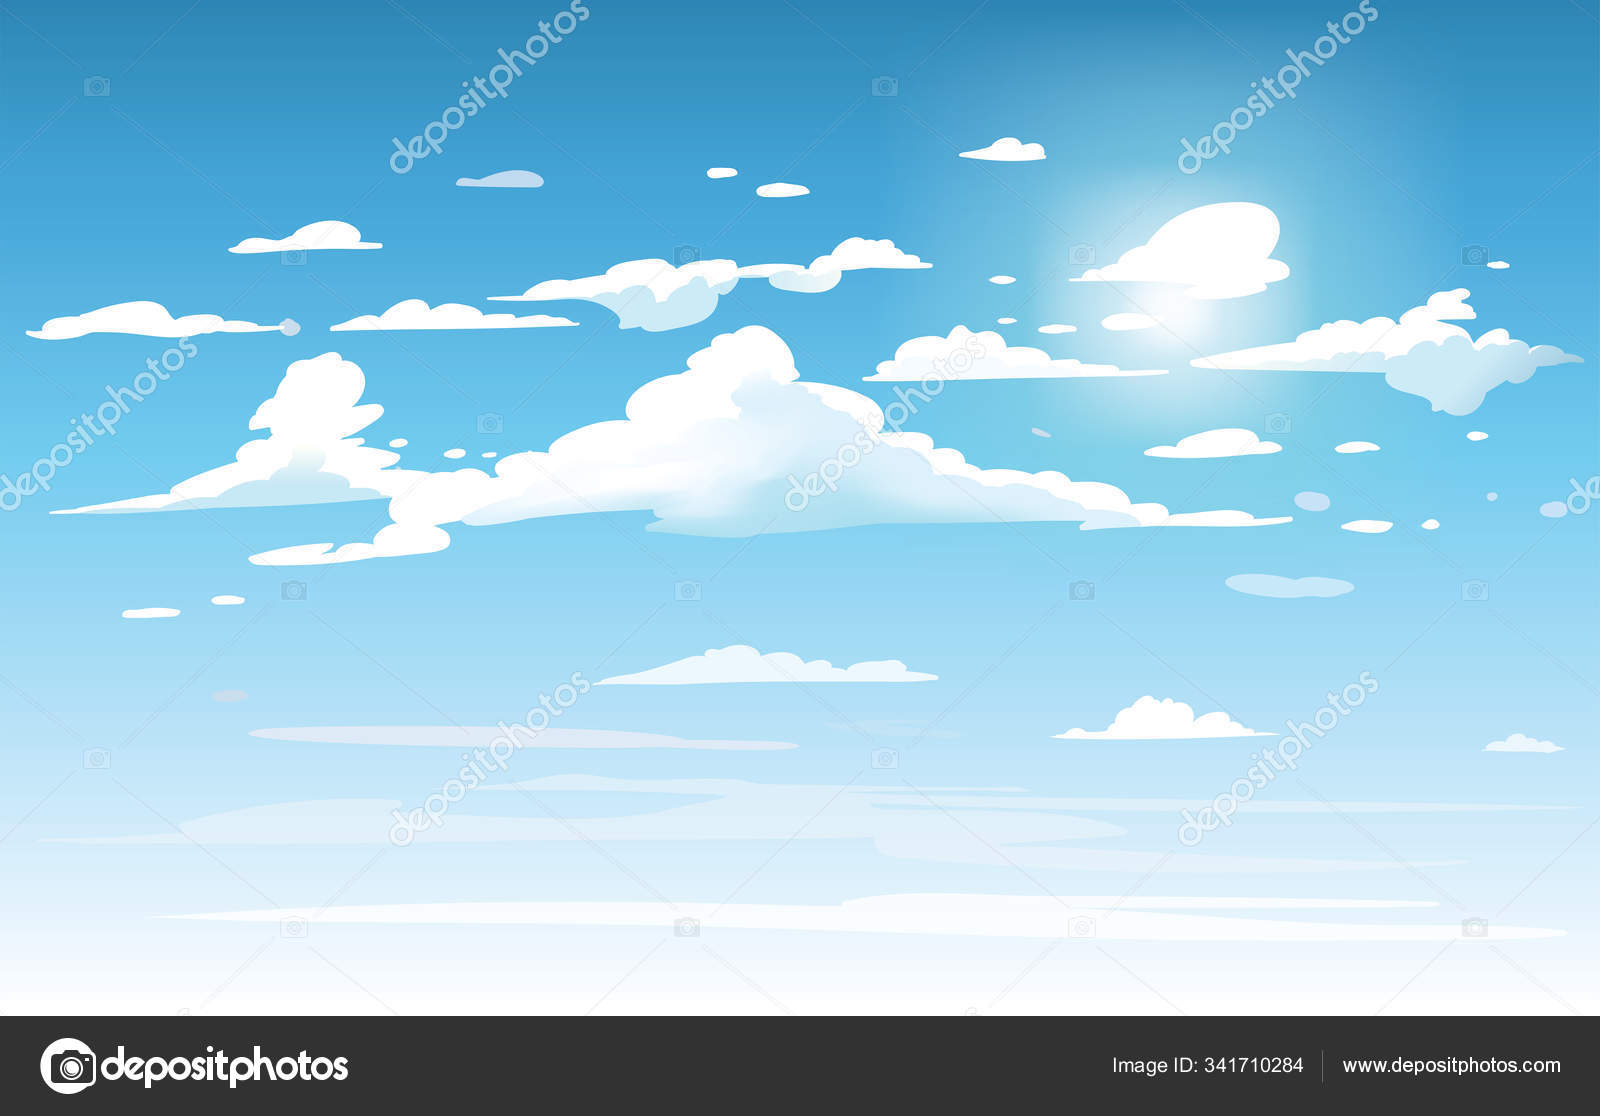 Anime Clouds Stock Photos, Images and Backgrounds for Free Download